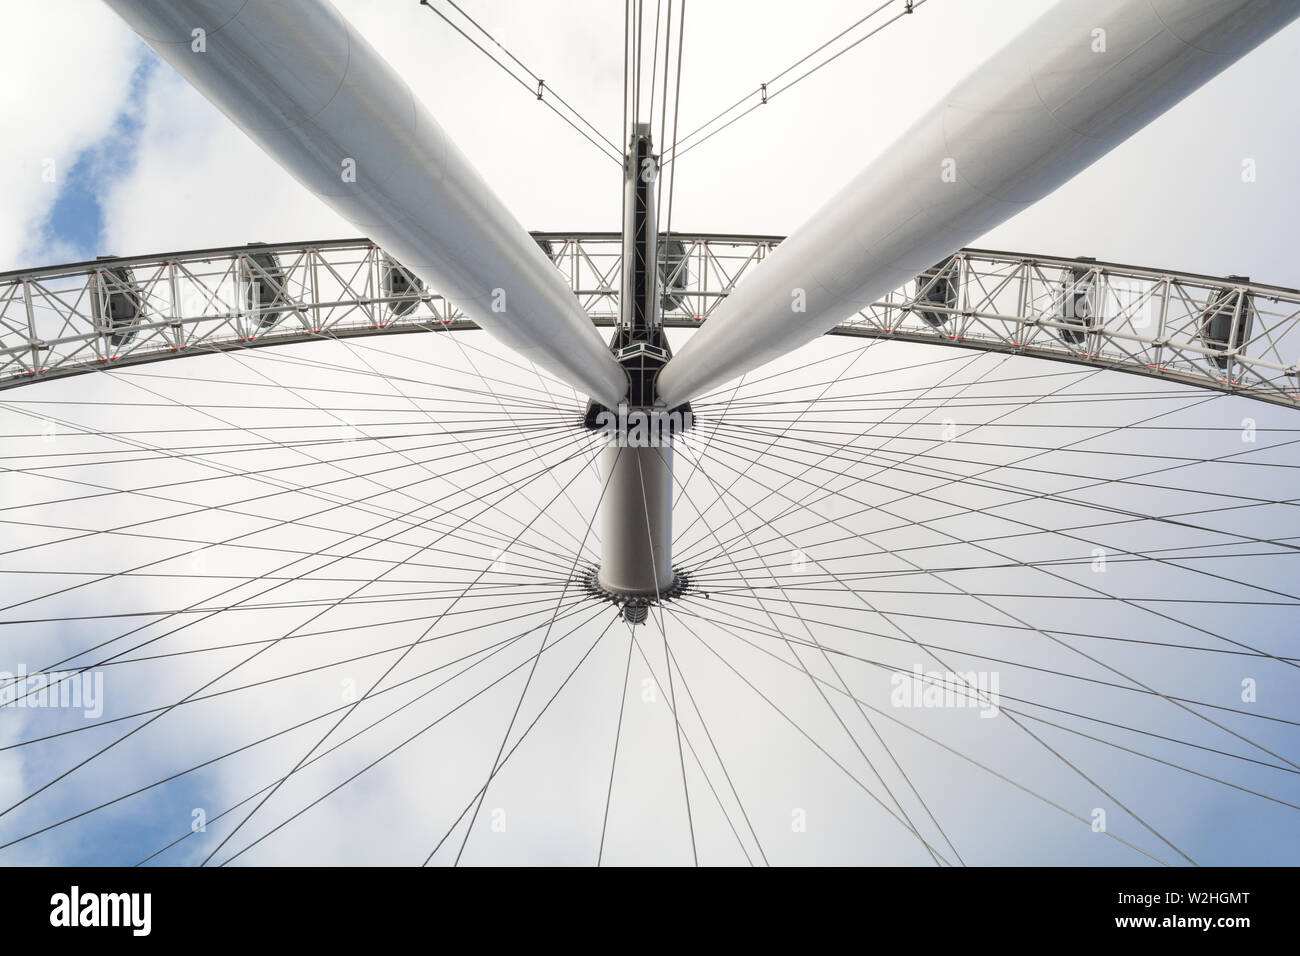 London, UK - February 20, 2019. Low angle view of the London Eye on February 20, 2019. The London Eye is a major tourist attraction for visitors to th Stock Photo